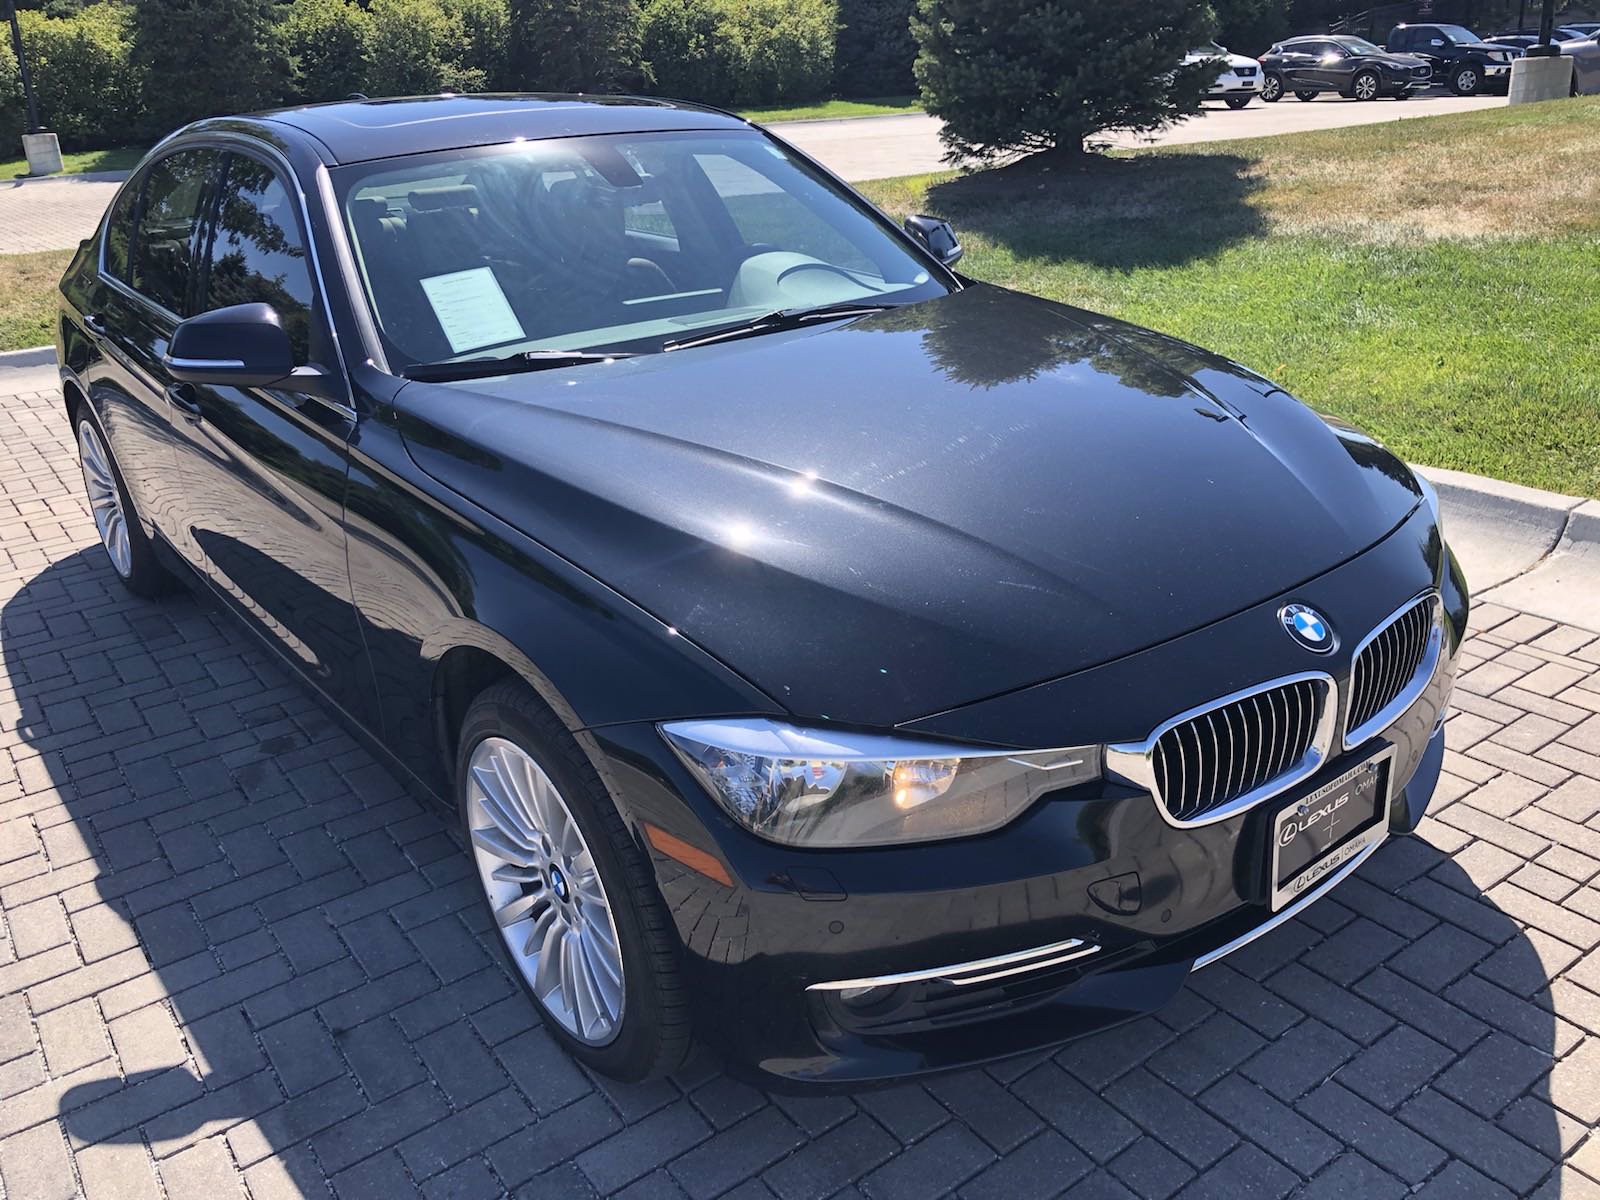 PreOwned 2015 BMW 328i xDRIVE 4DR SDN AWD/4WD,1 OWNE 4dr